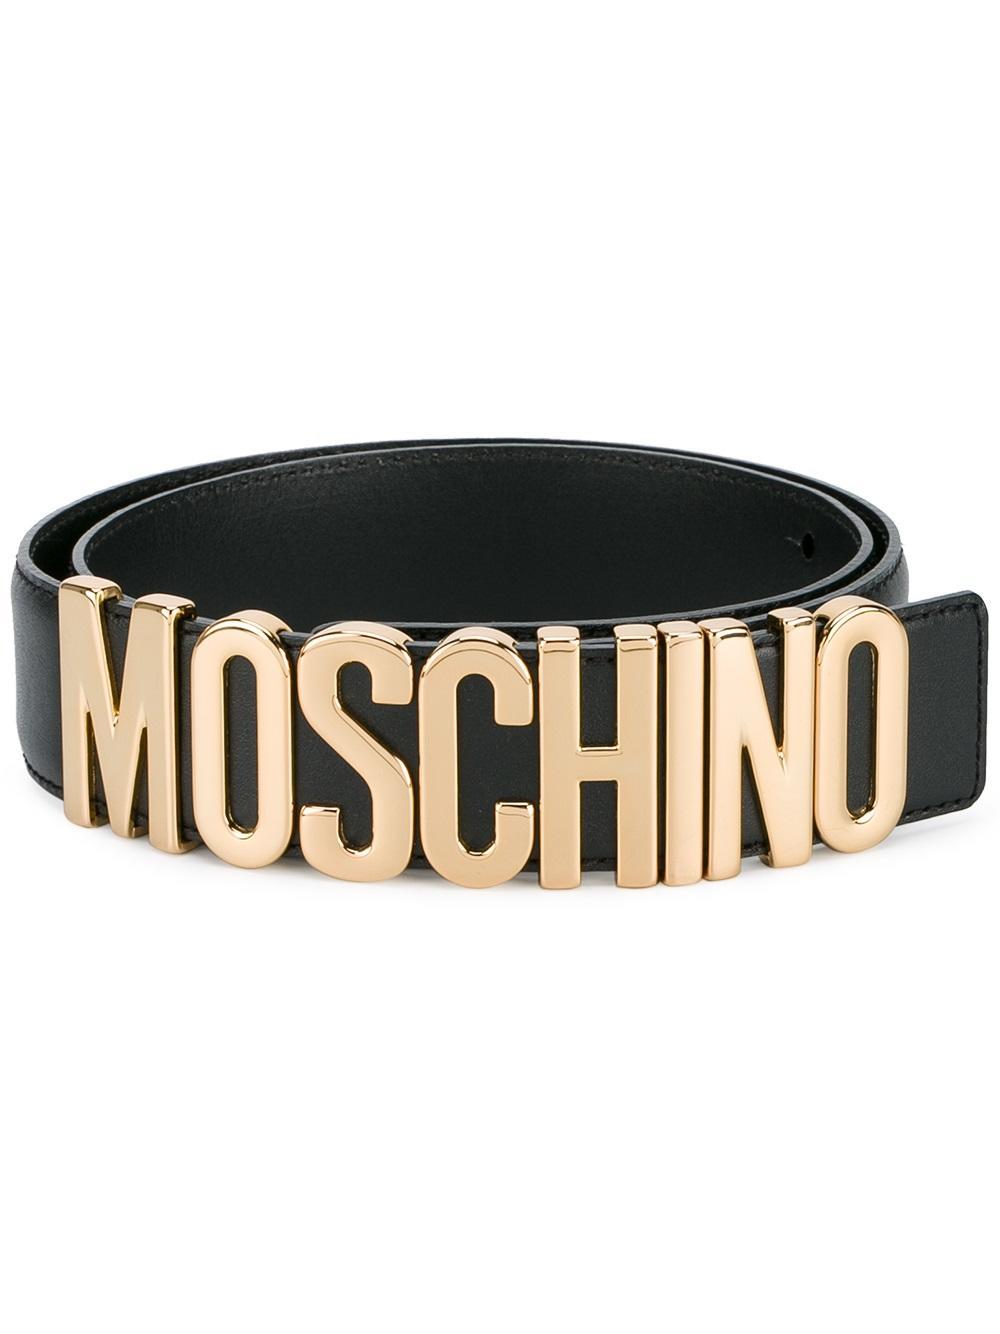 Moschino Logo Belt With Gold-tone Hardware in Black | Lyst